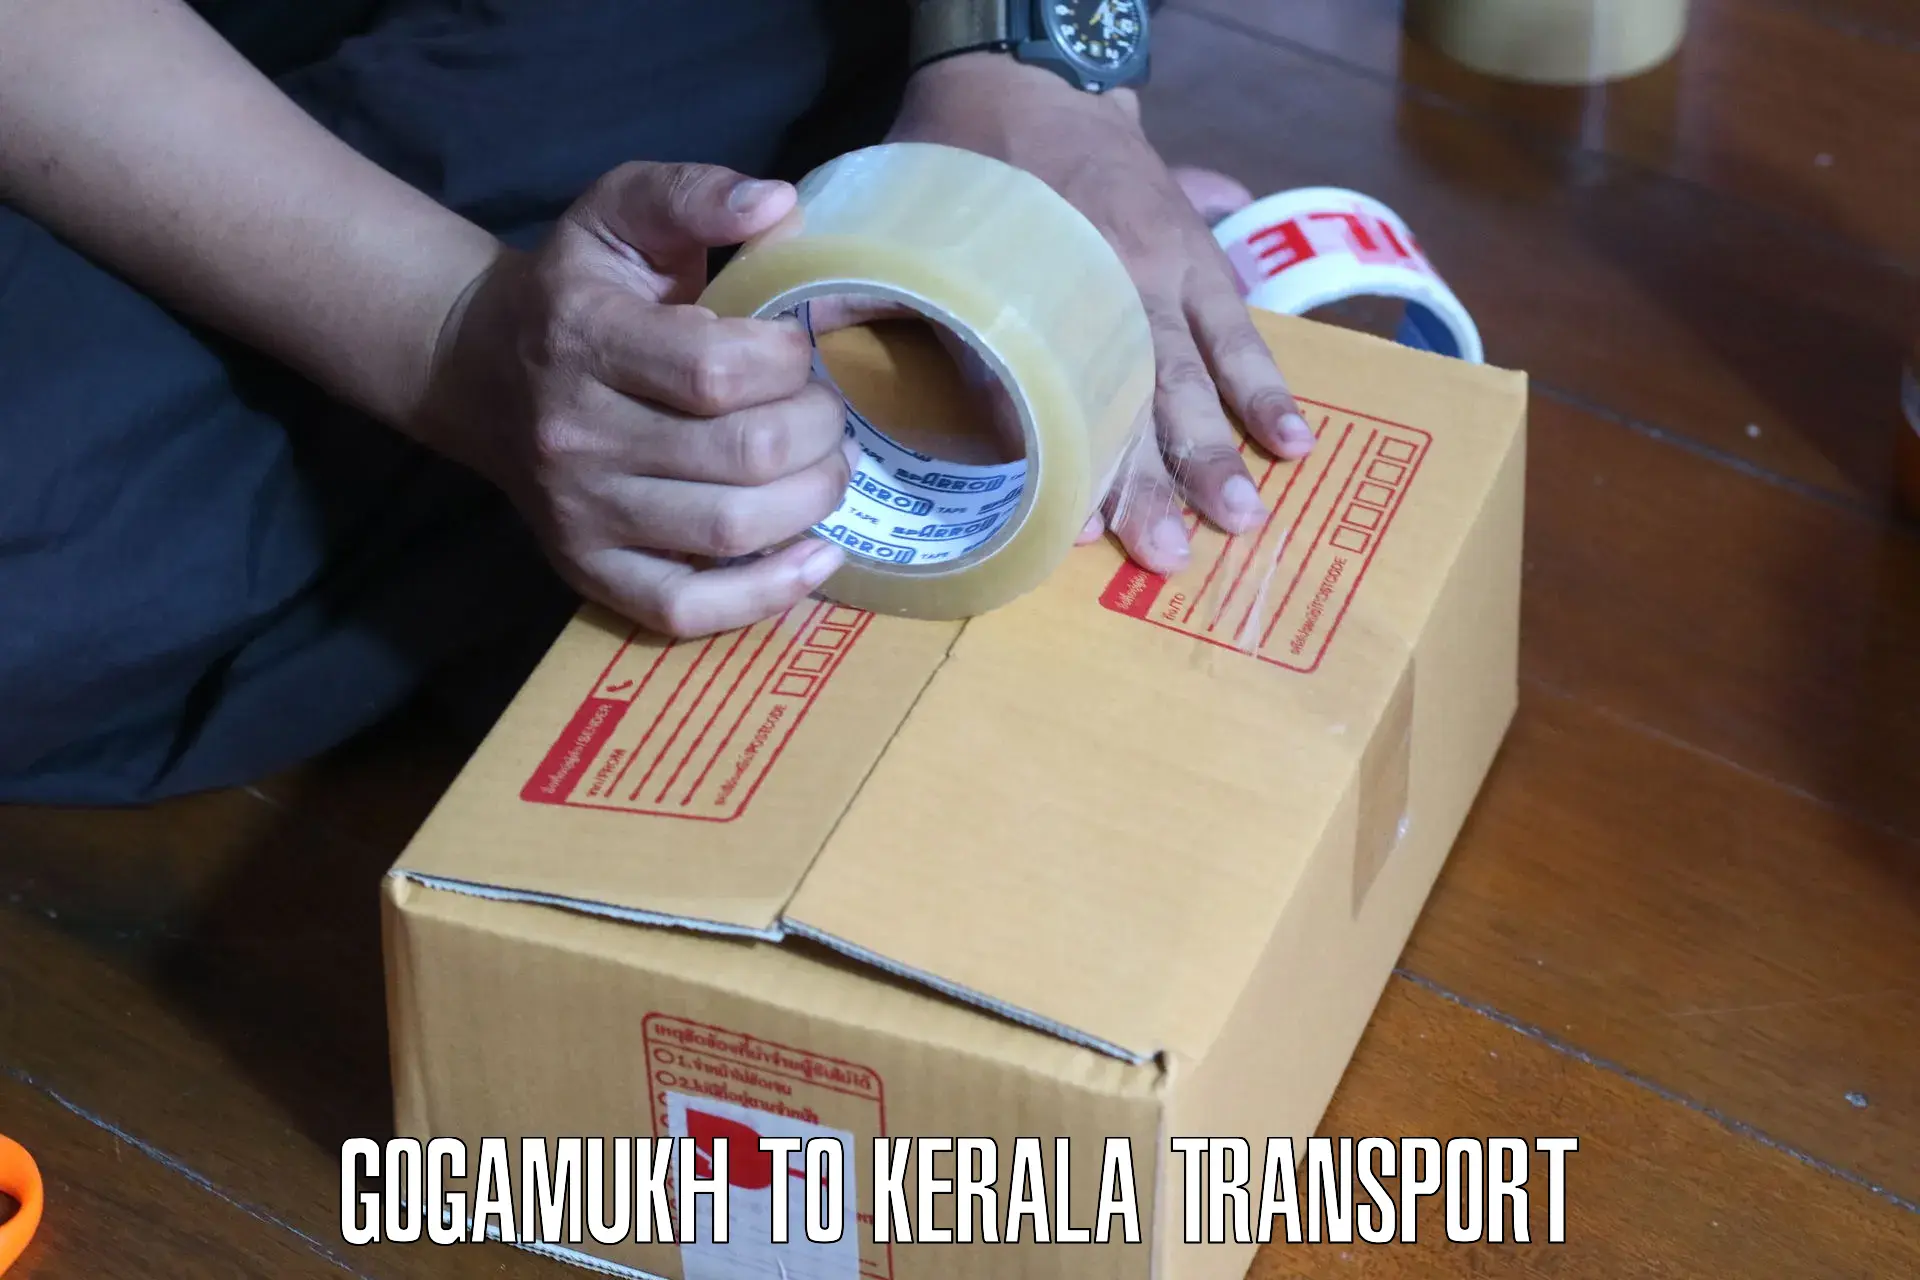 Cargo train transport services Gogamukh to Cochin University of Science and Technology